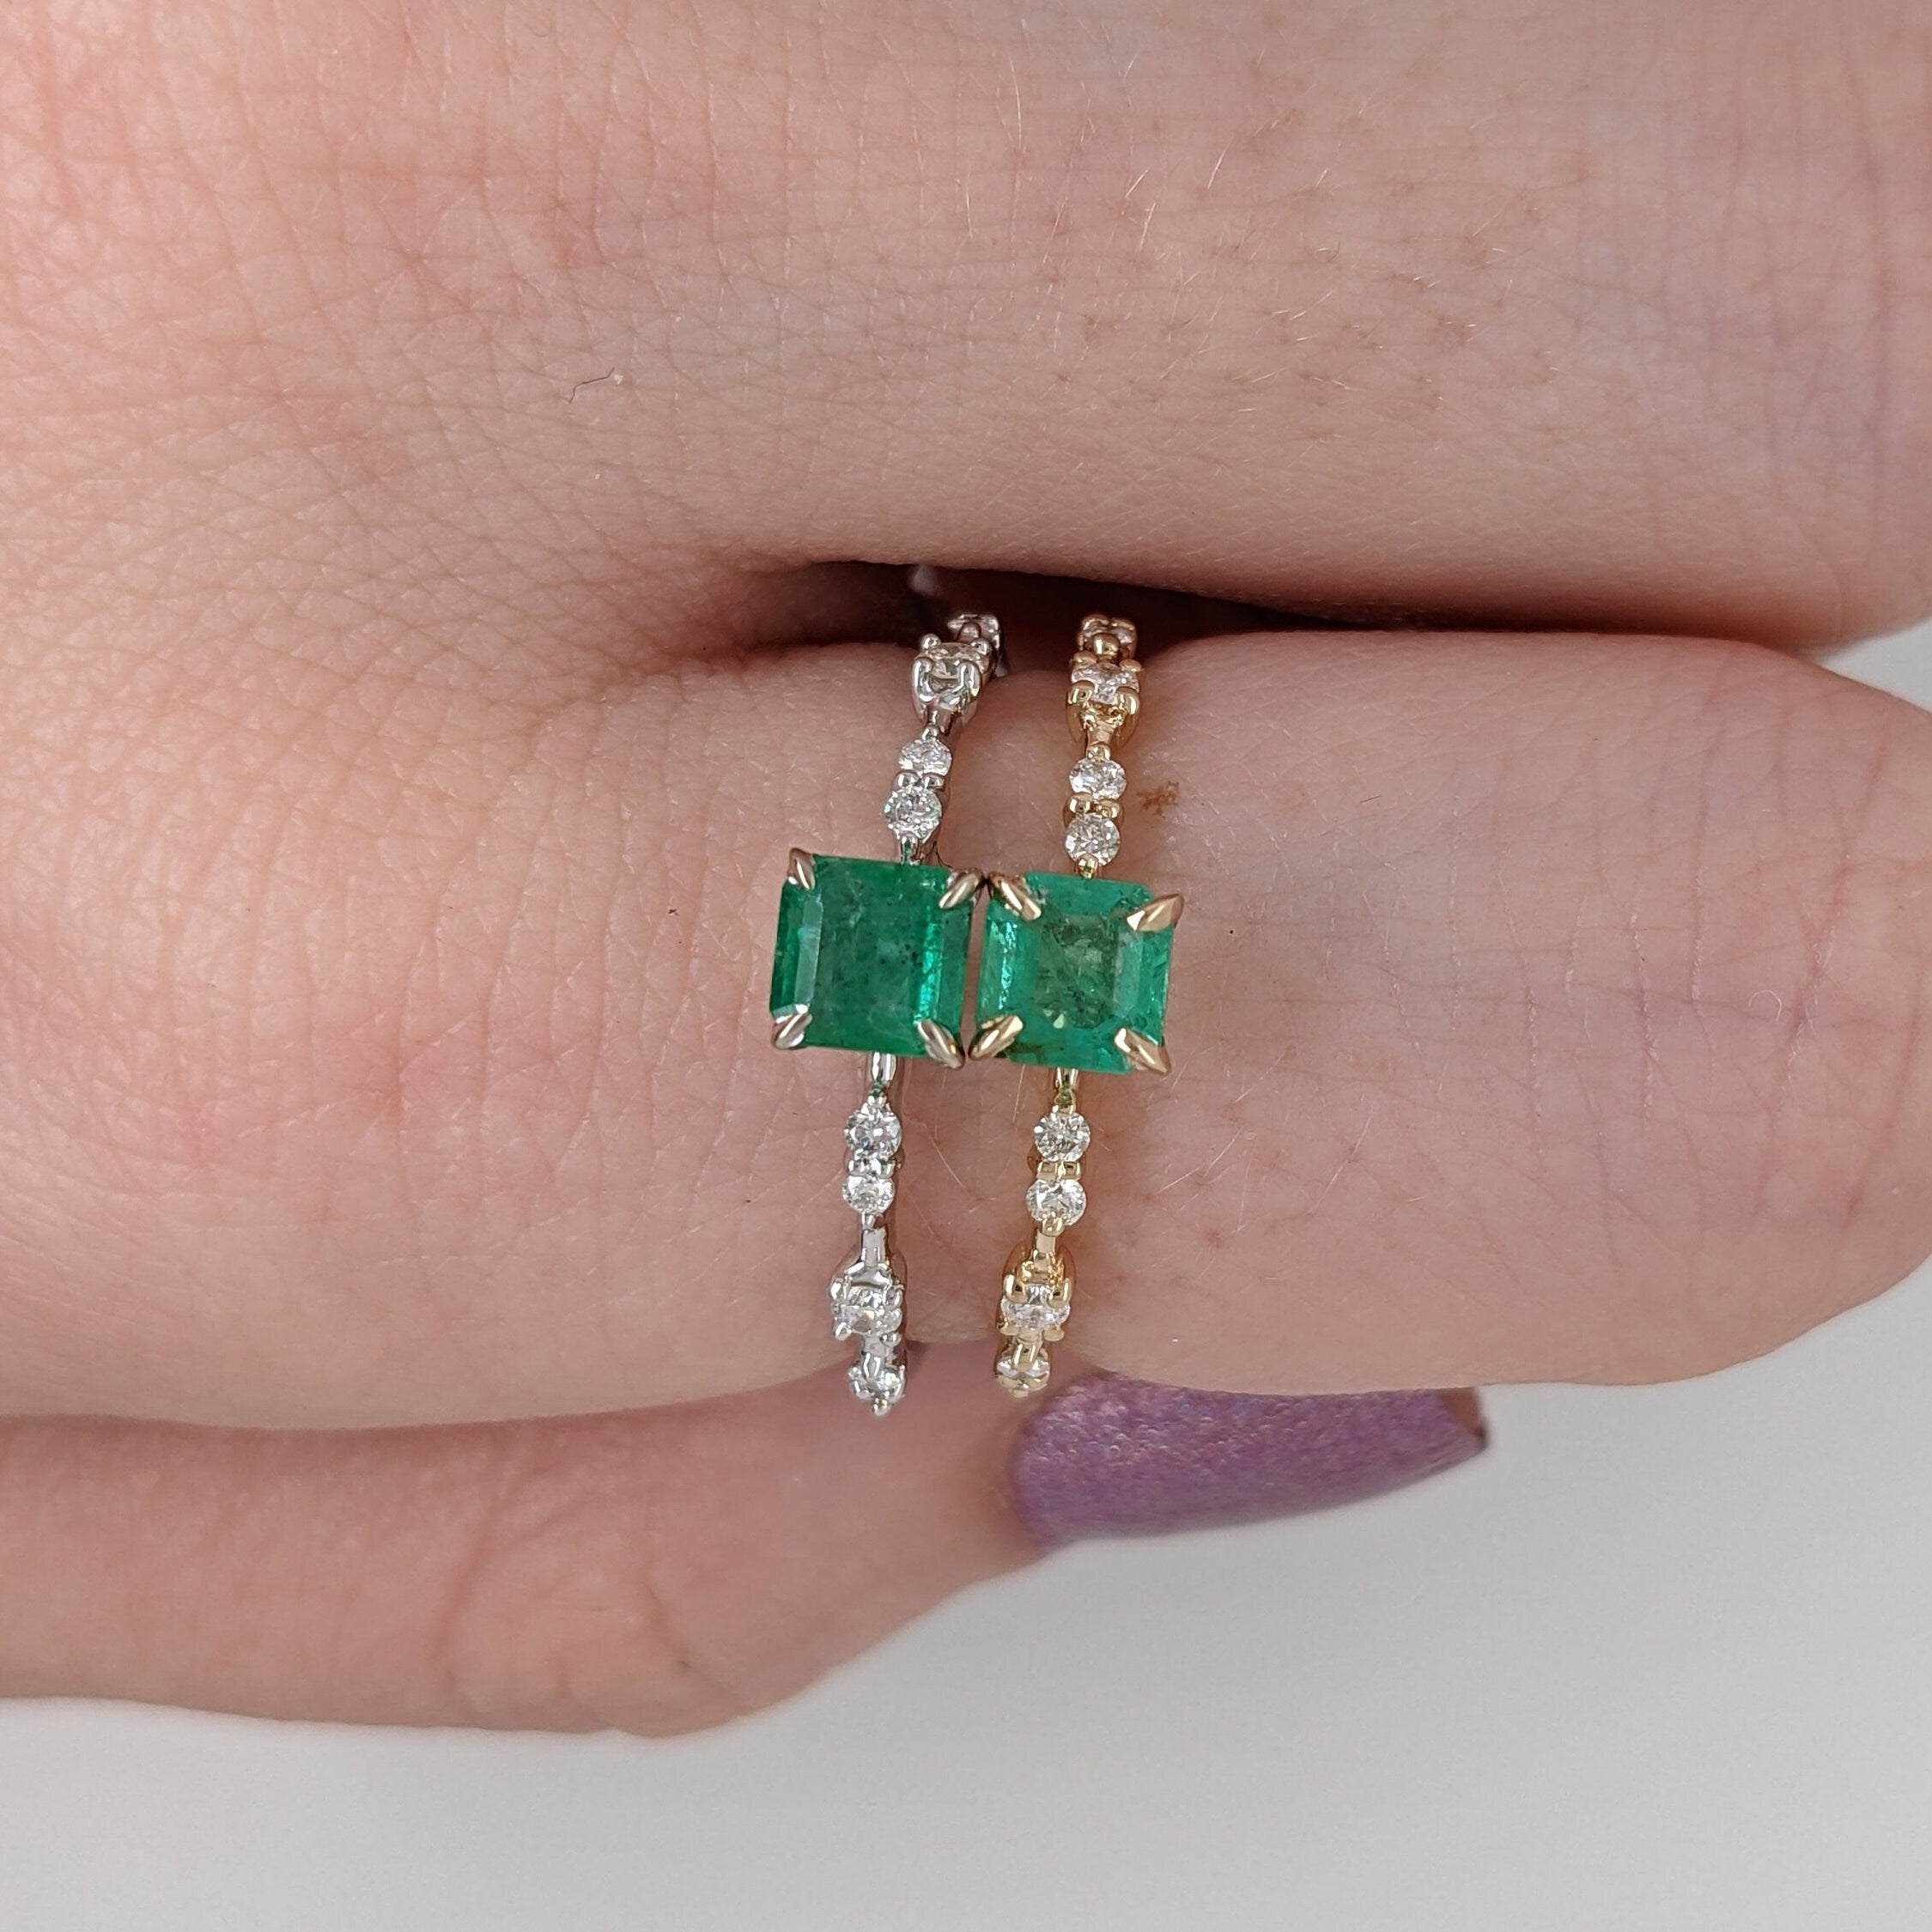 Fancy Green Emerald Ring in 14k Gold with Natural Diamond Accents | May Birthstone | Unique Shank Design | Dainty Ring